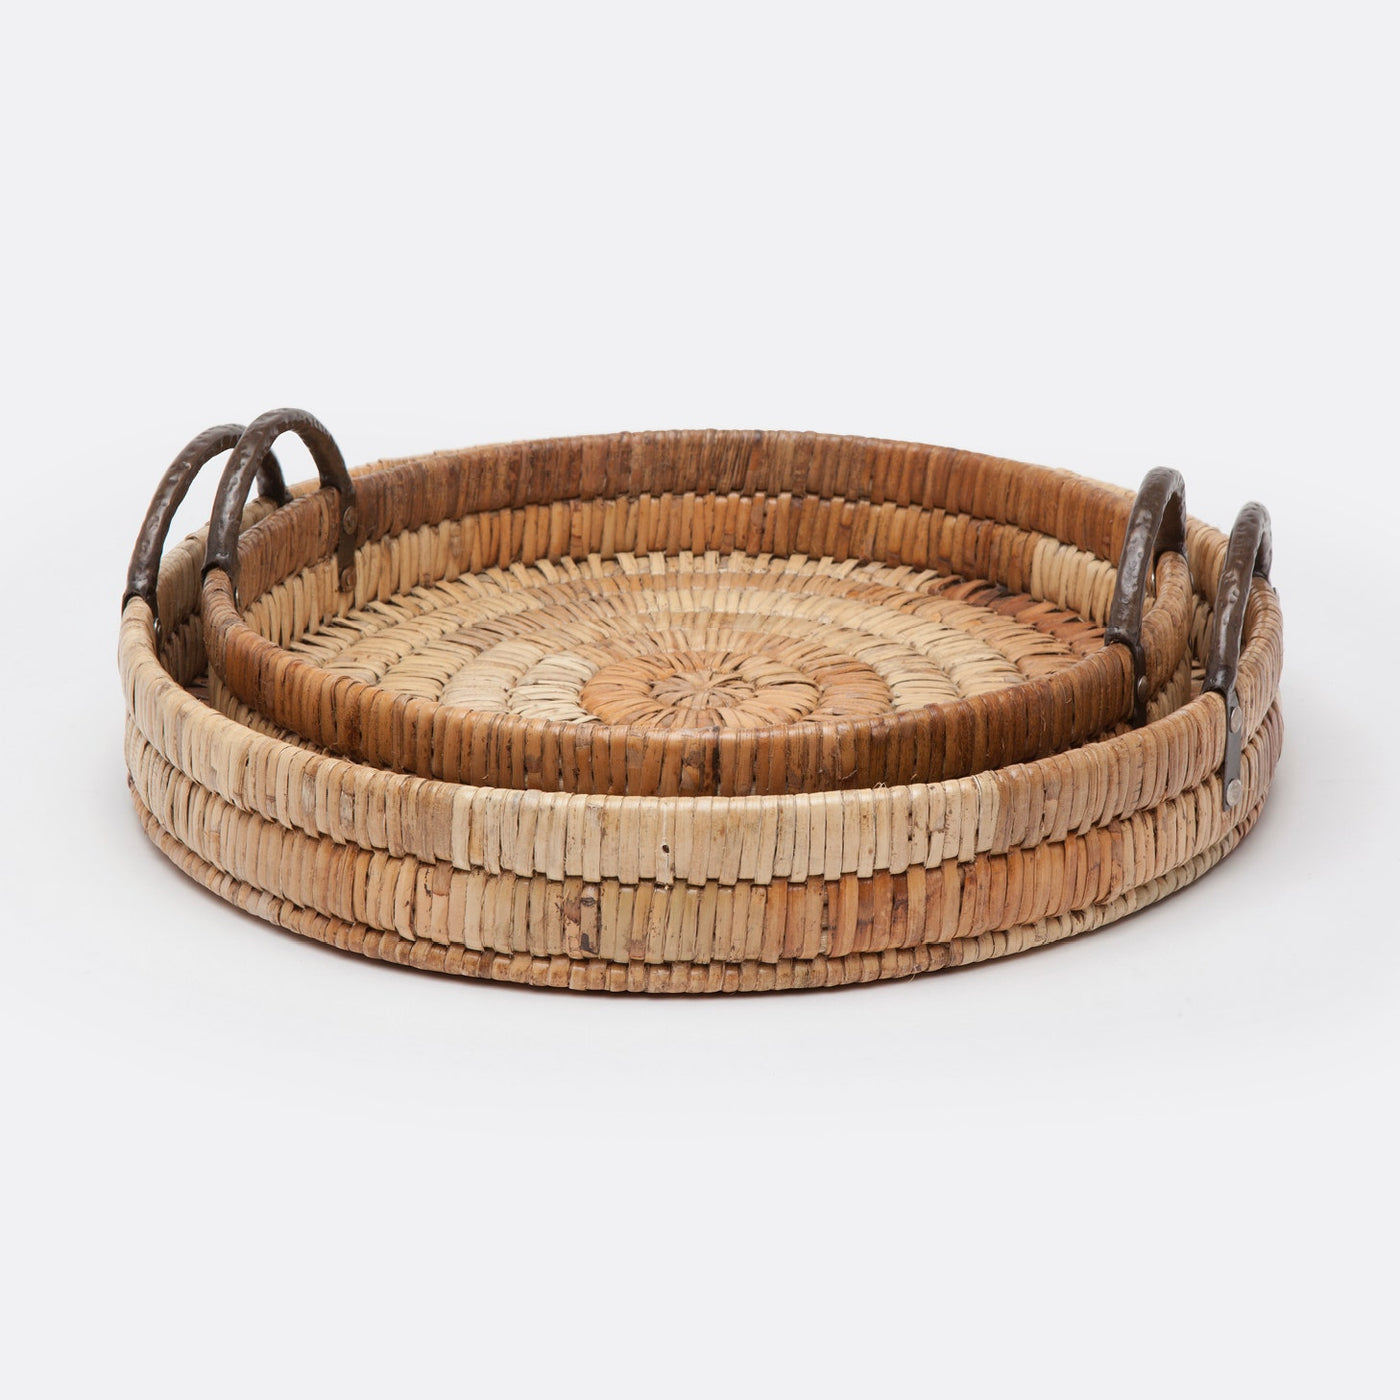 TRAY AGED RATTAN ROUND (Available in 2 Sizes)